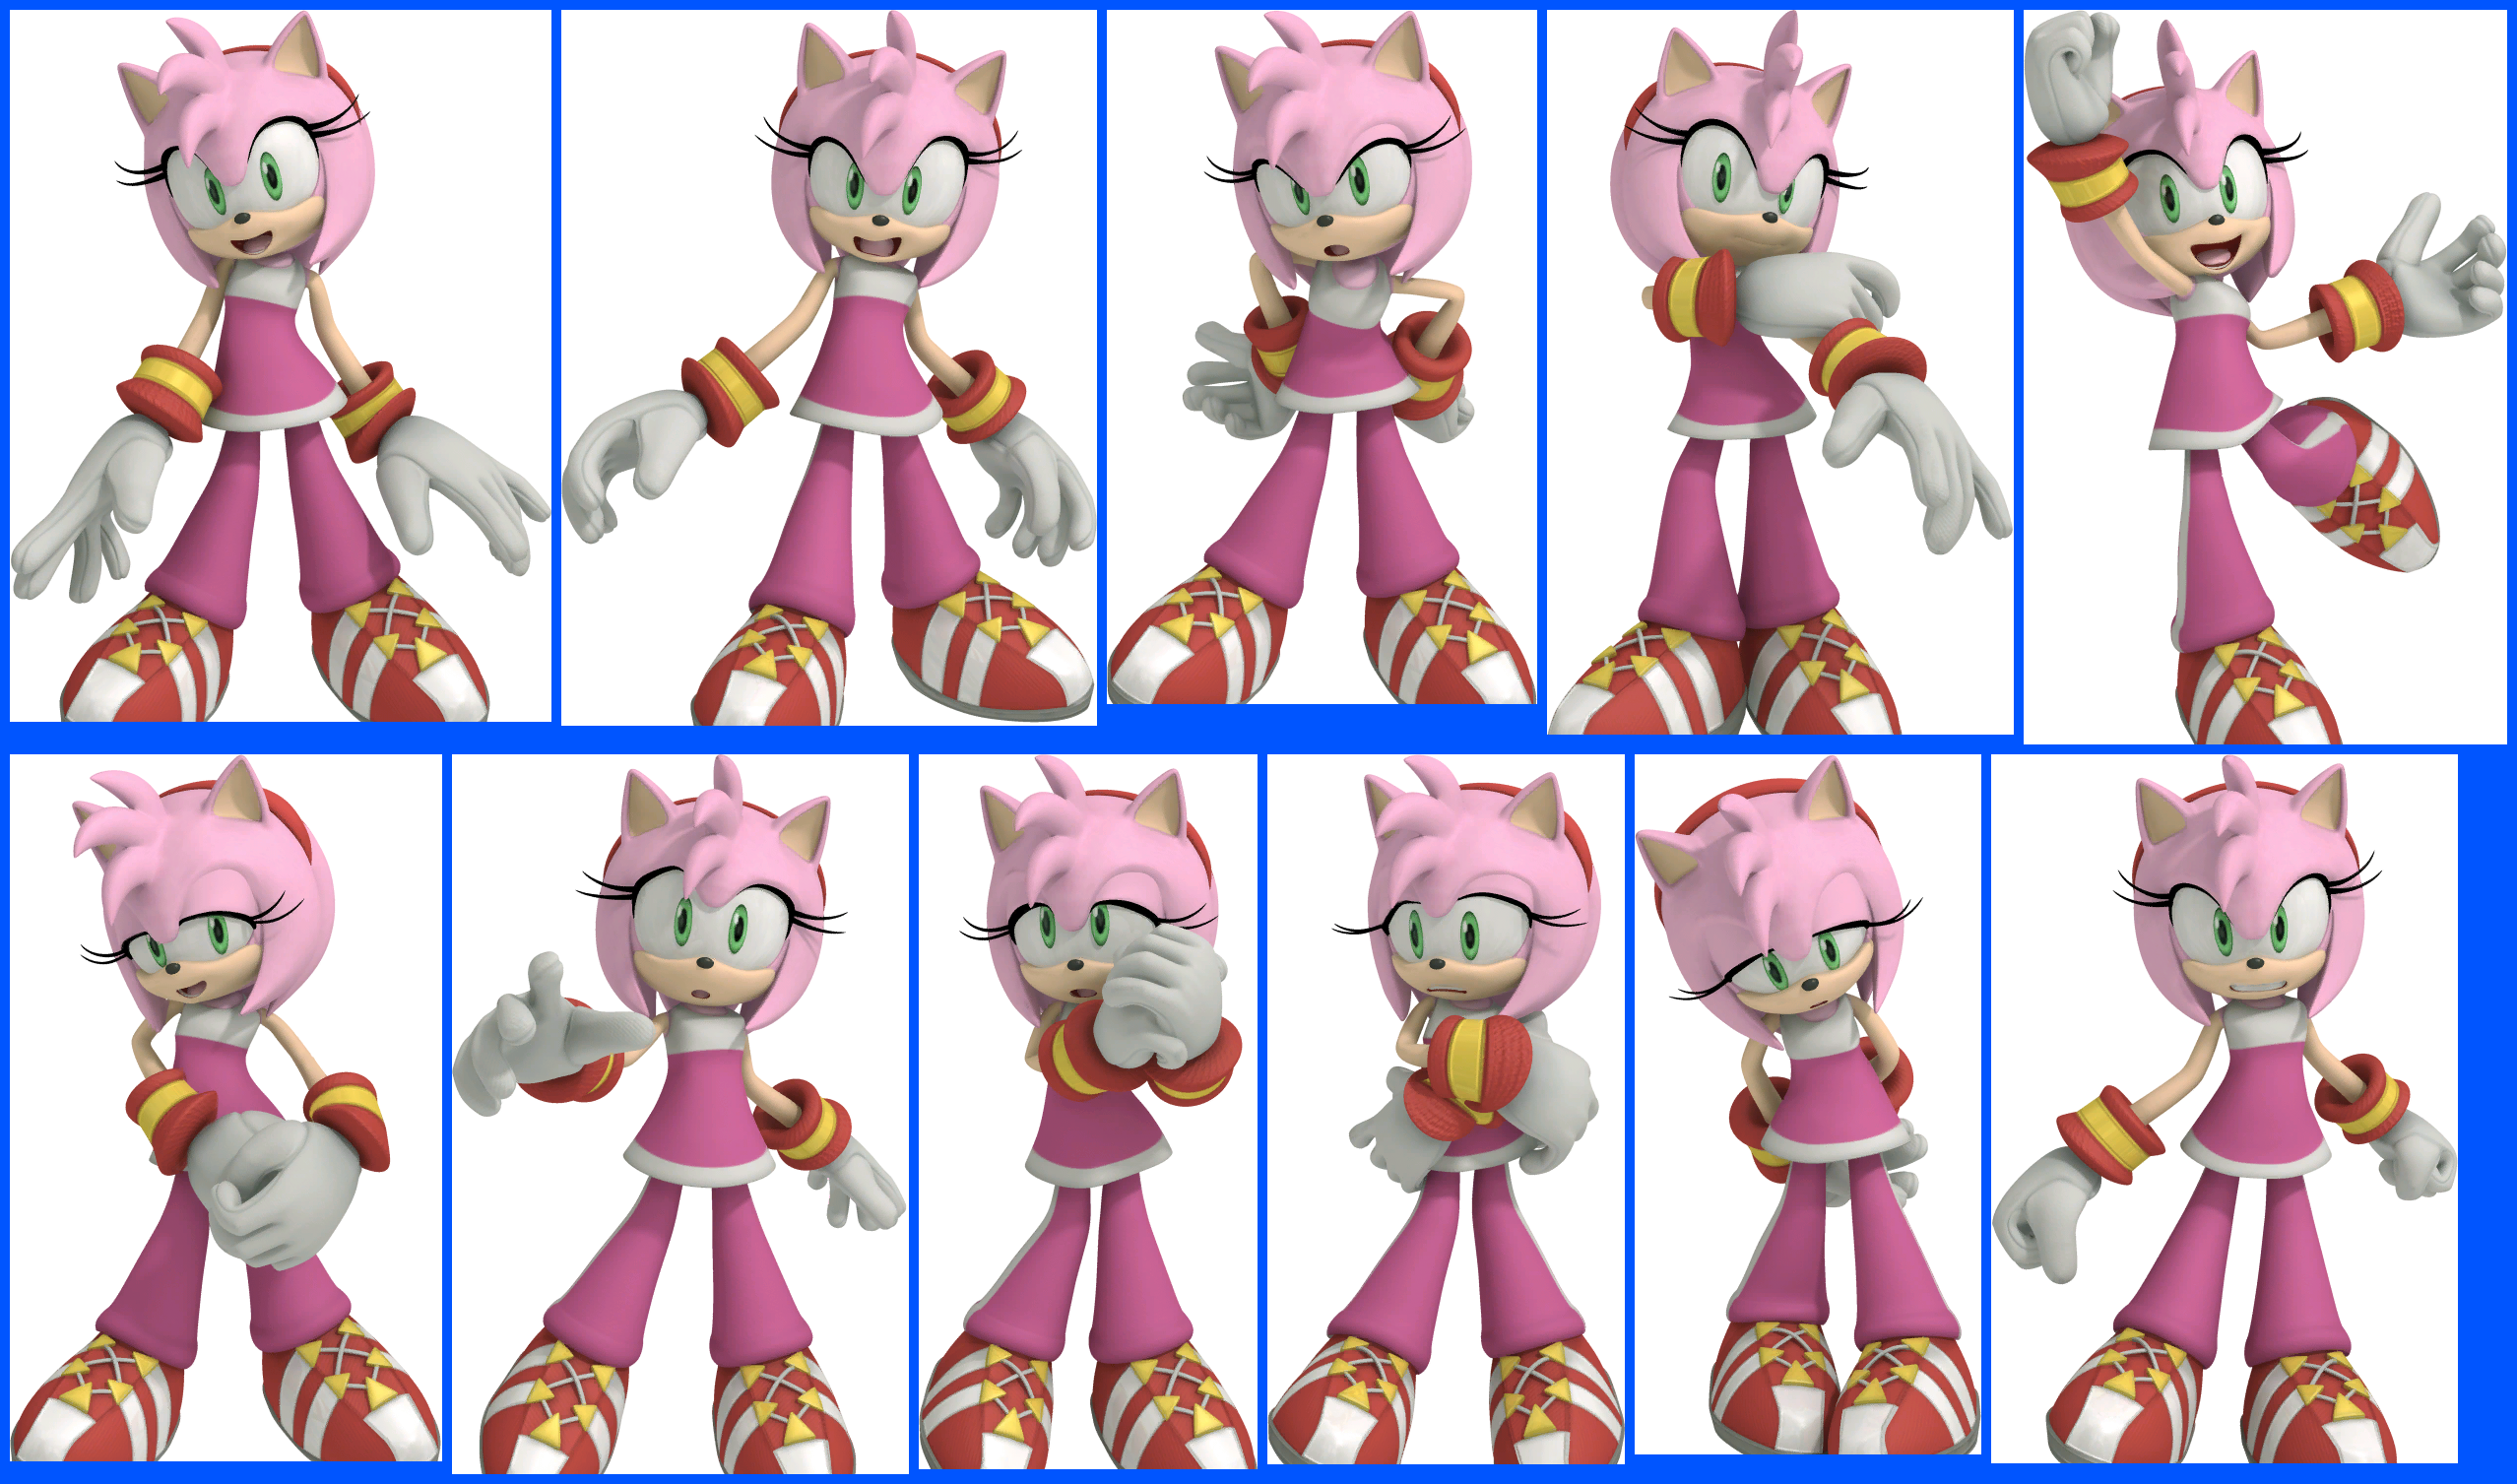 Sonic Free Riders - Amy Rose